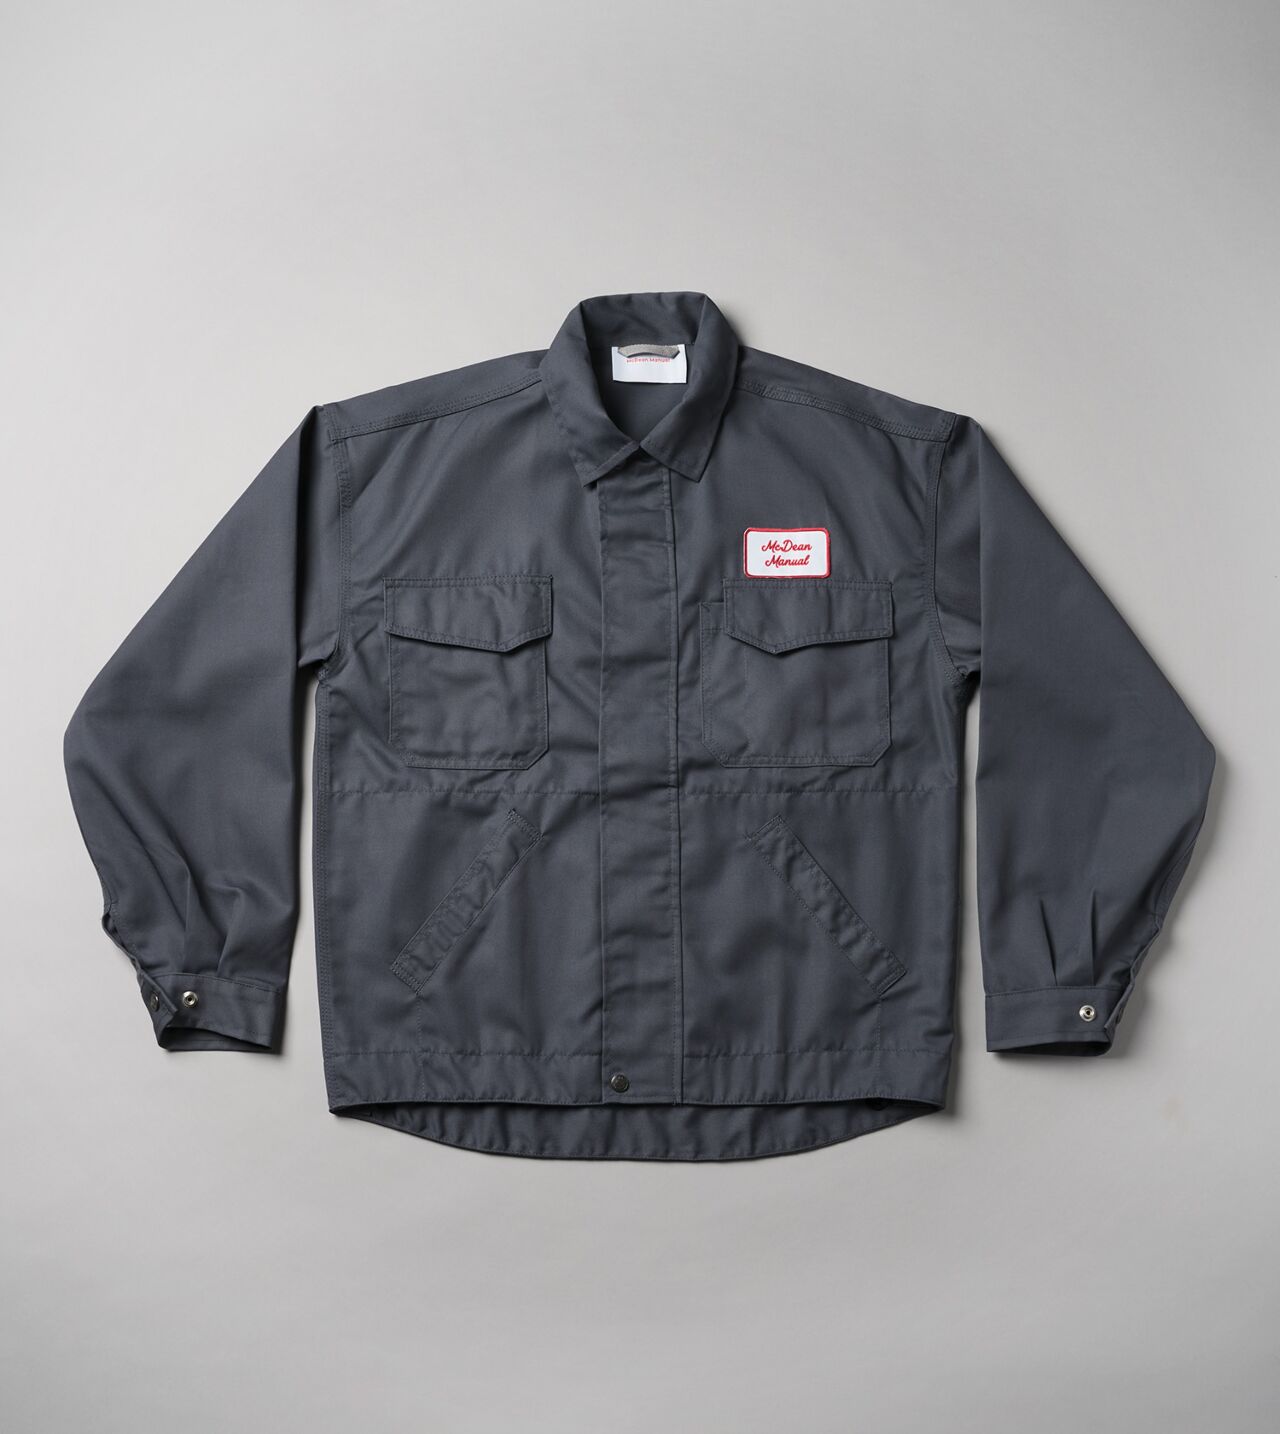 Picture of Byredo Craig McDean Mechanic Jacket Montreal M